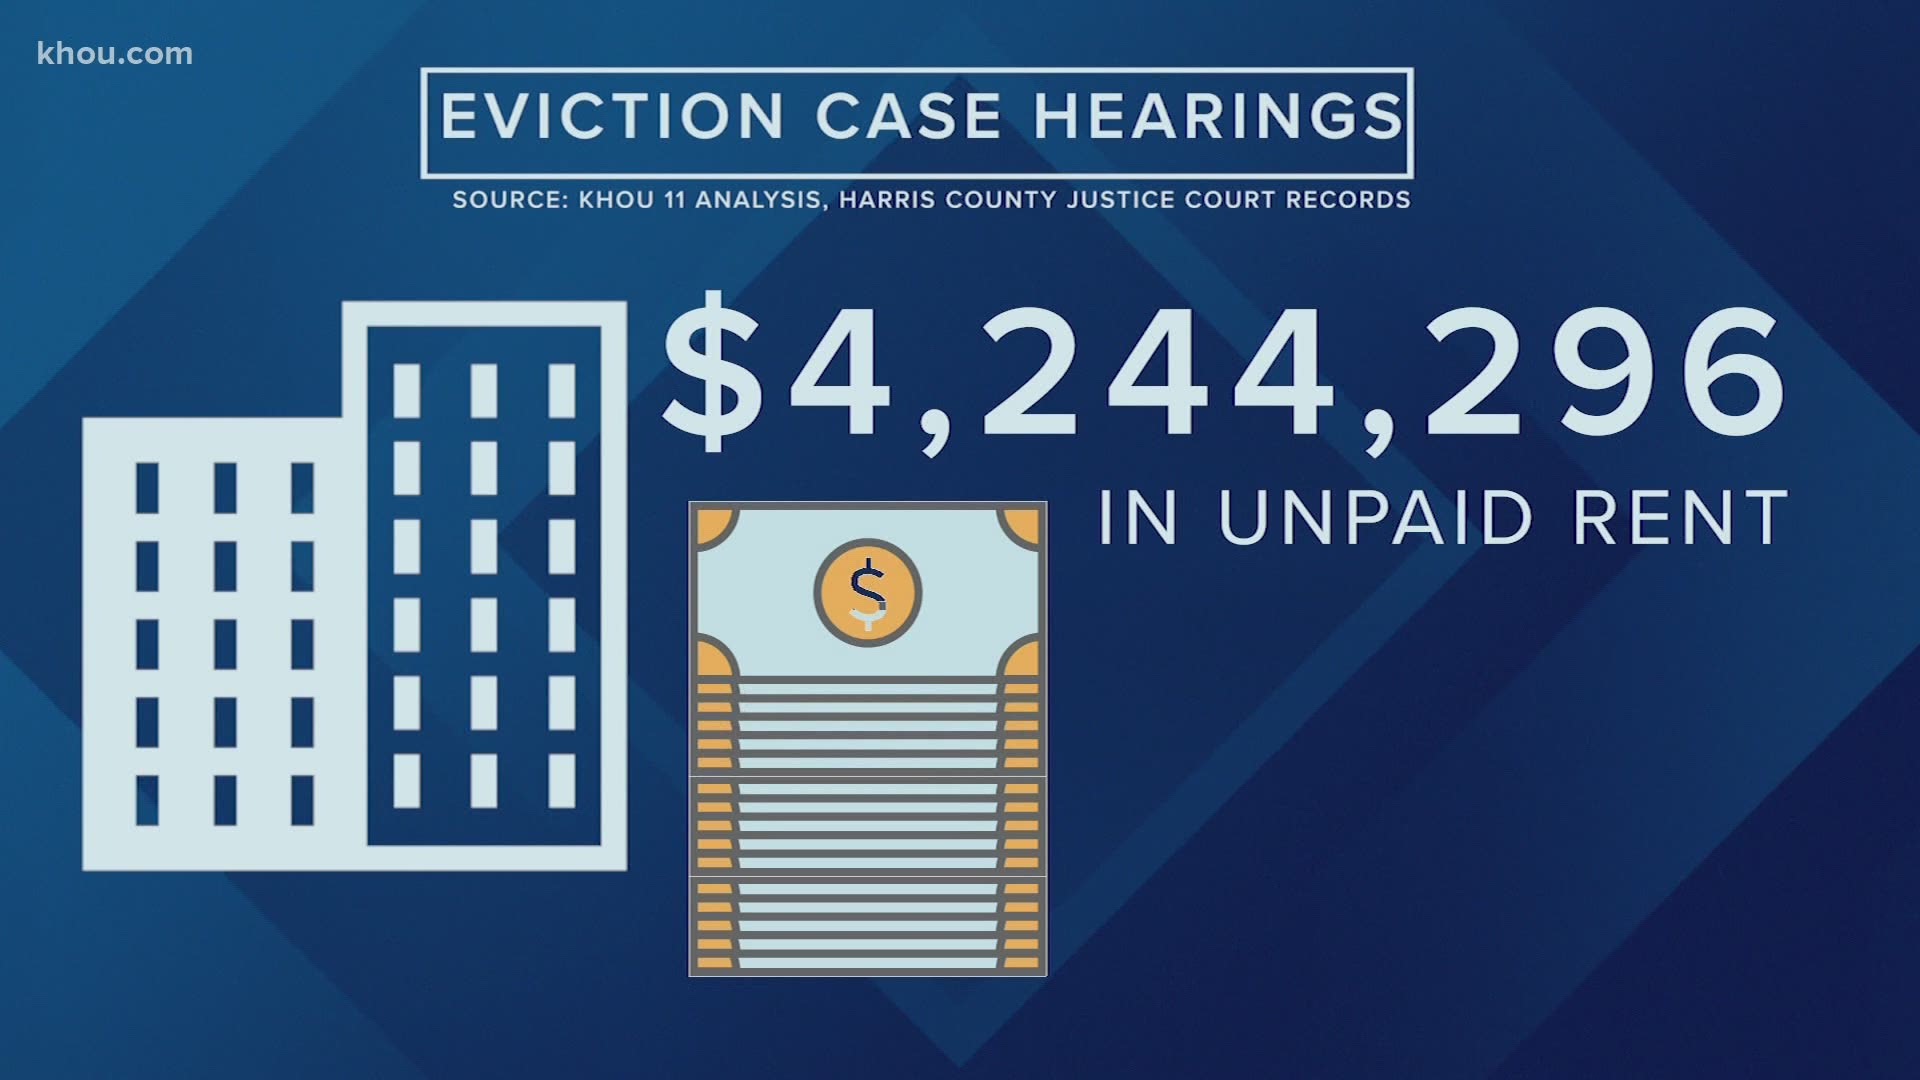 Despite efforts by local elected leaders to postpone evictions through late August, judges have moved ahead with their eviction dockets.